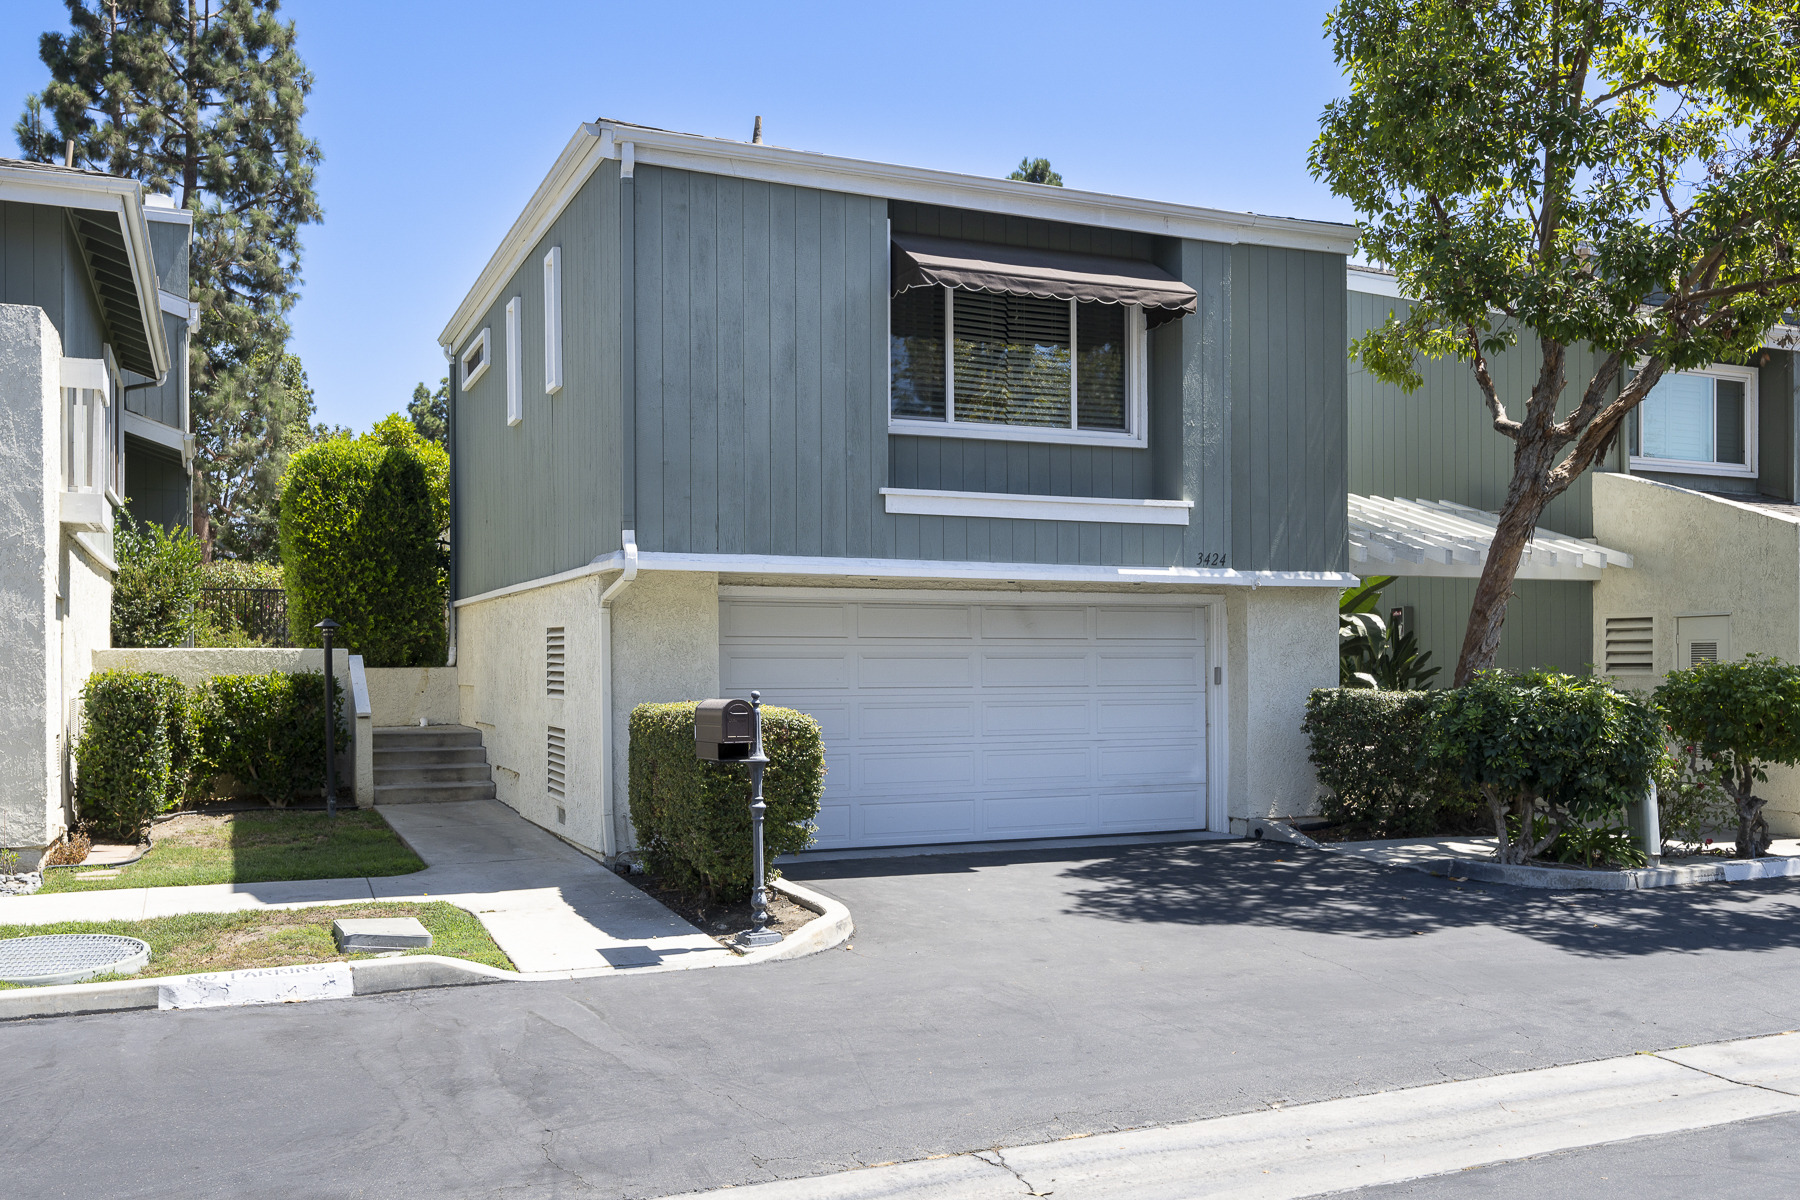 3424 Pinebrook Costa Mesa CA 92626: Exterior shot with stairs on left side of house.